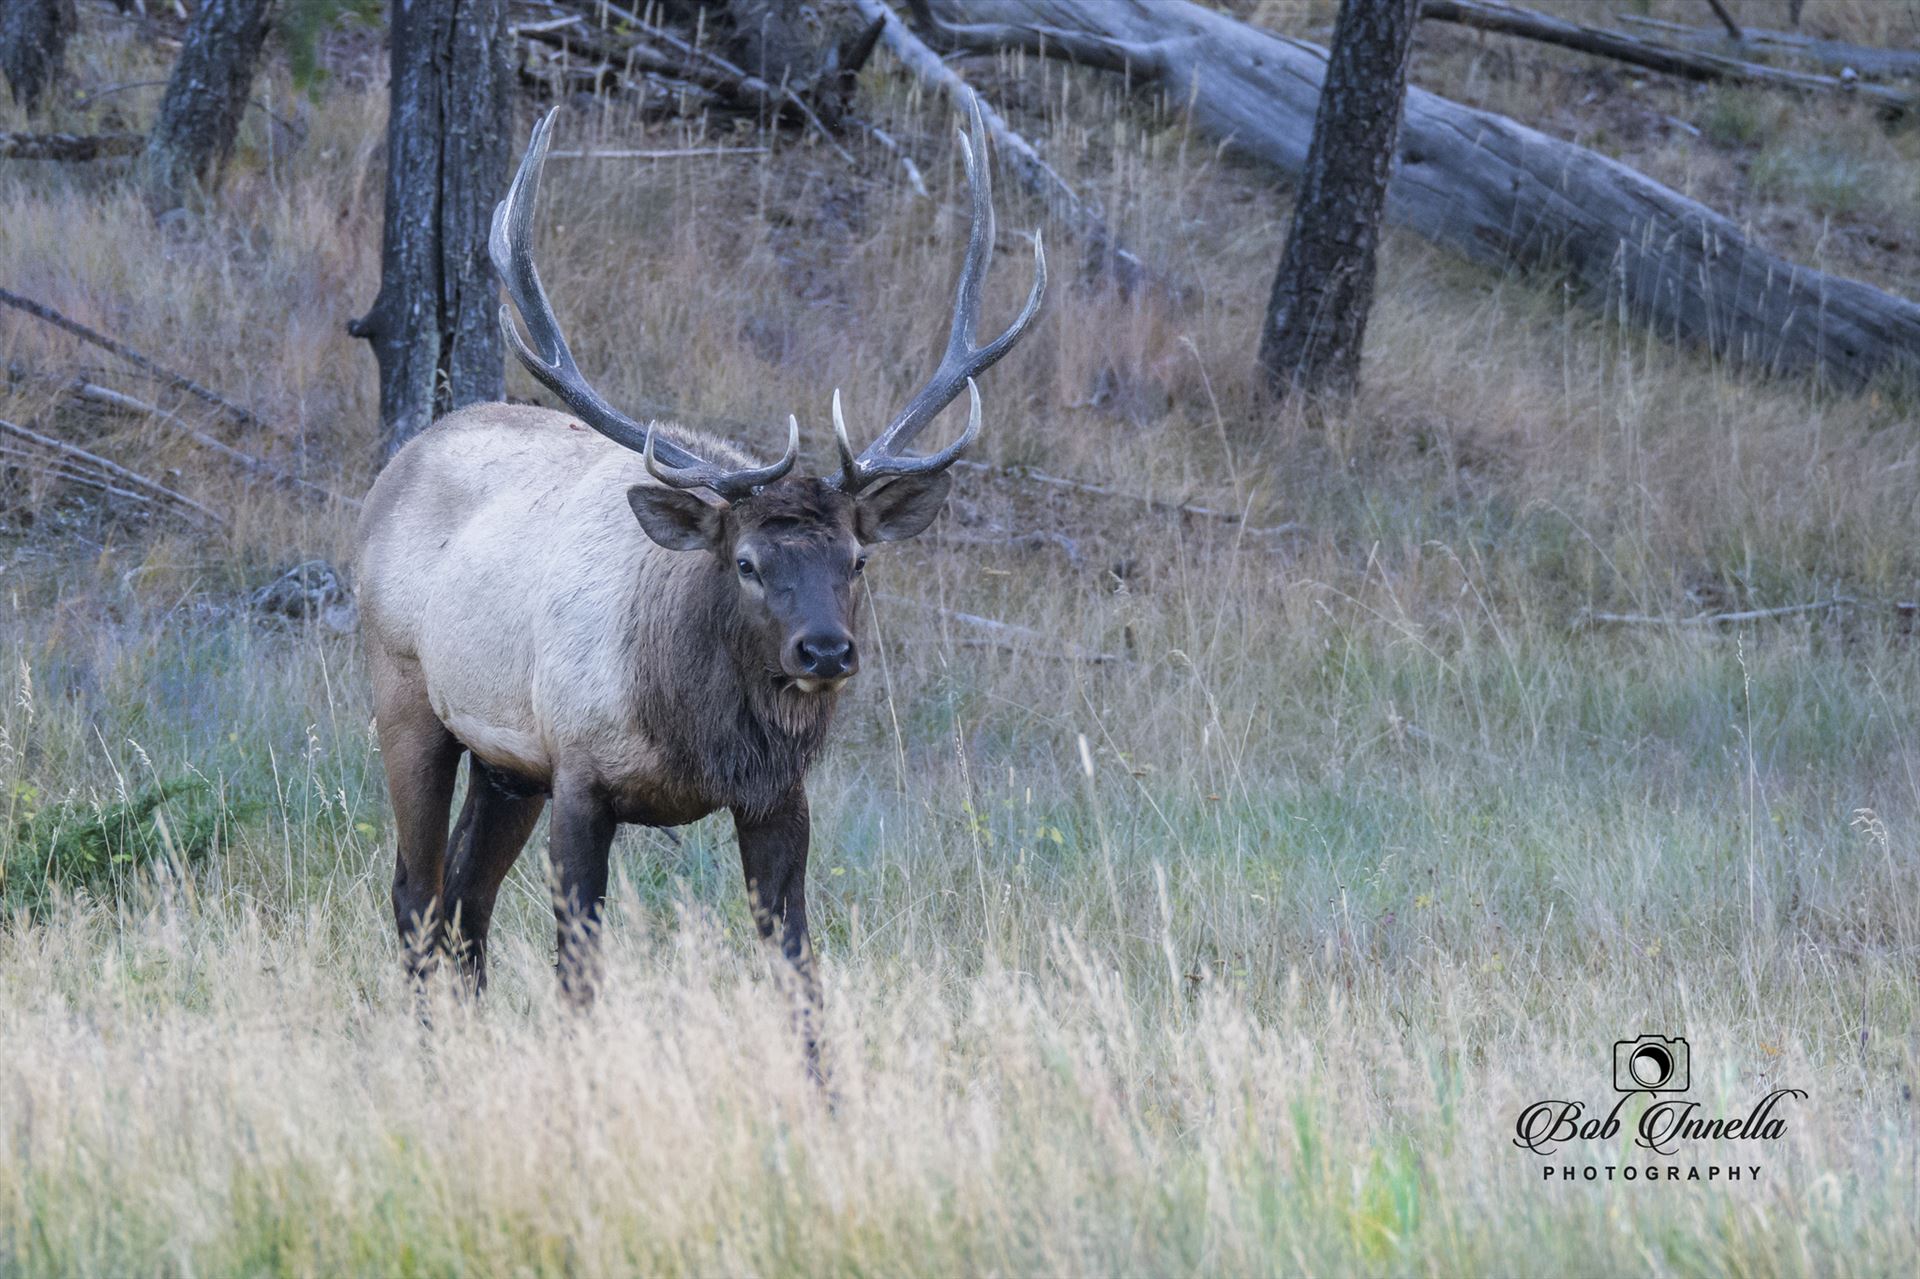 Bull Elk - Watching Me Making Sure I Don't Bother His Cows by Buckmaster